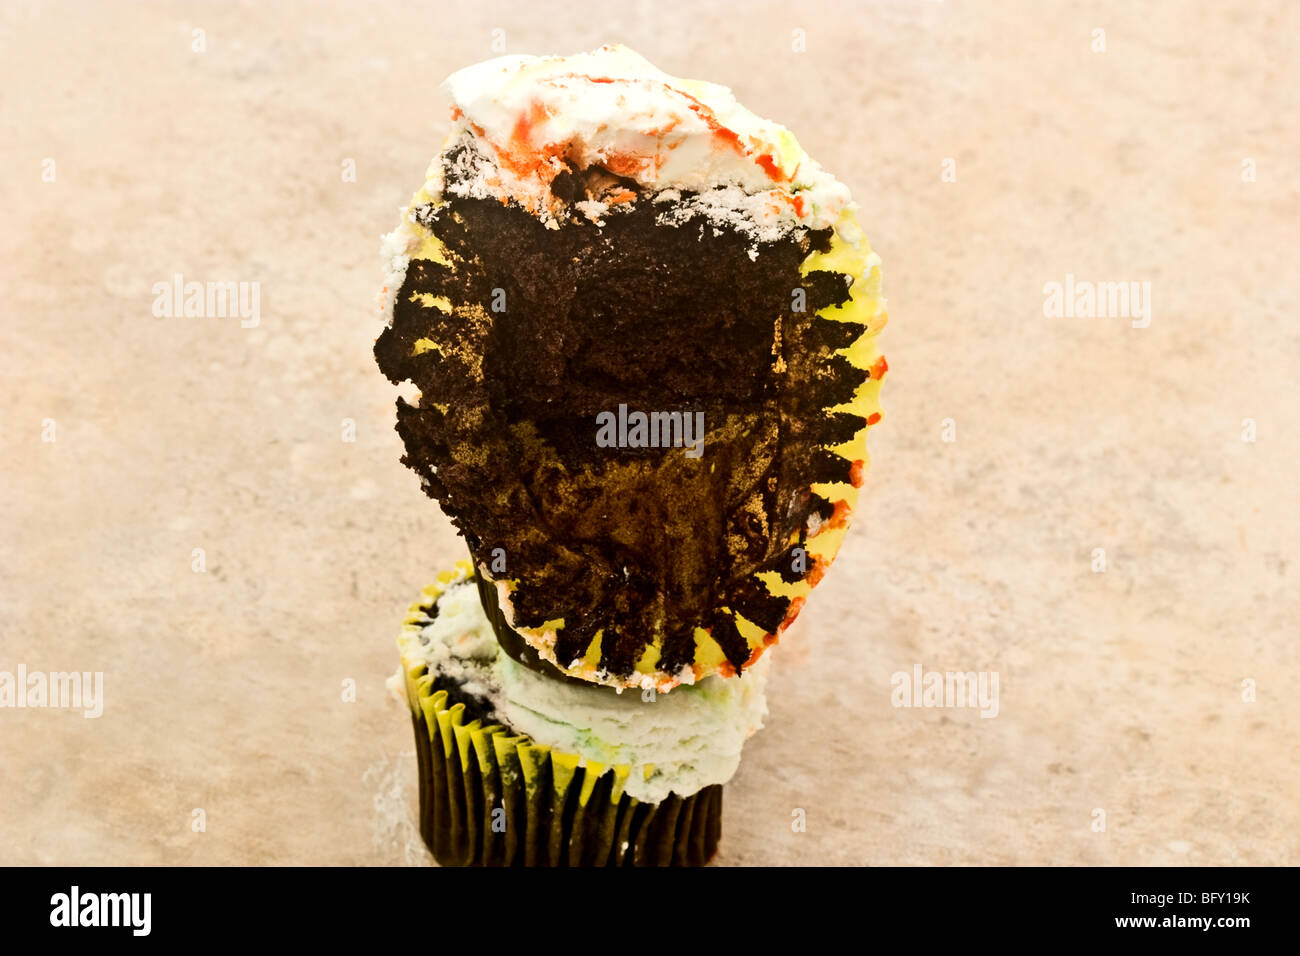 Pile of three chocolate cupcakes covered with icing, one half eaten Stock Photo